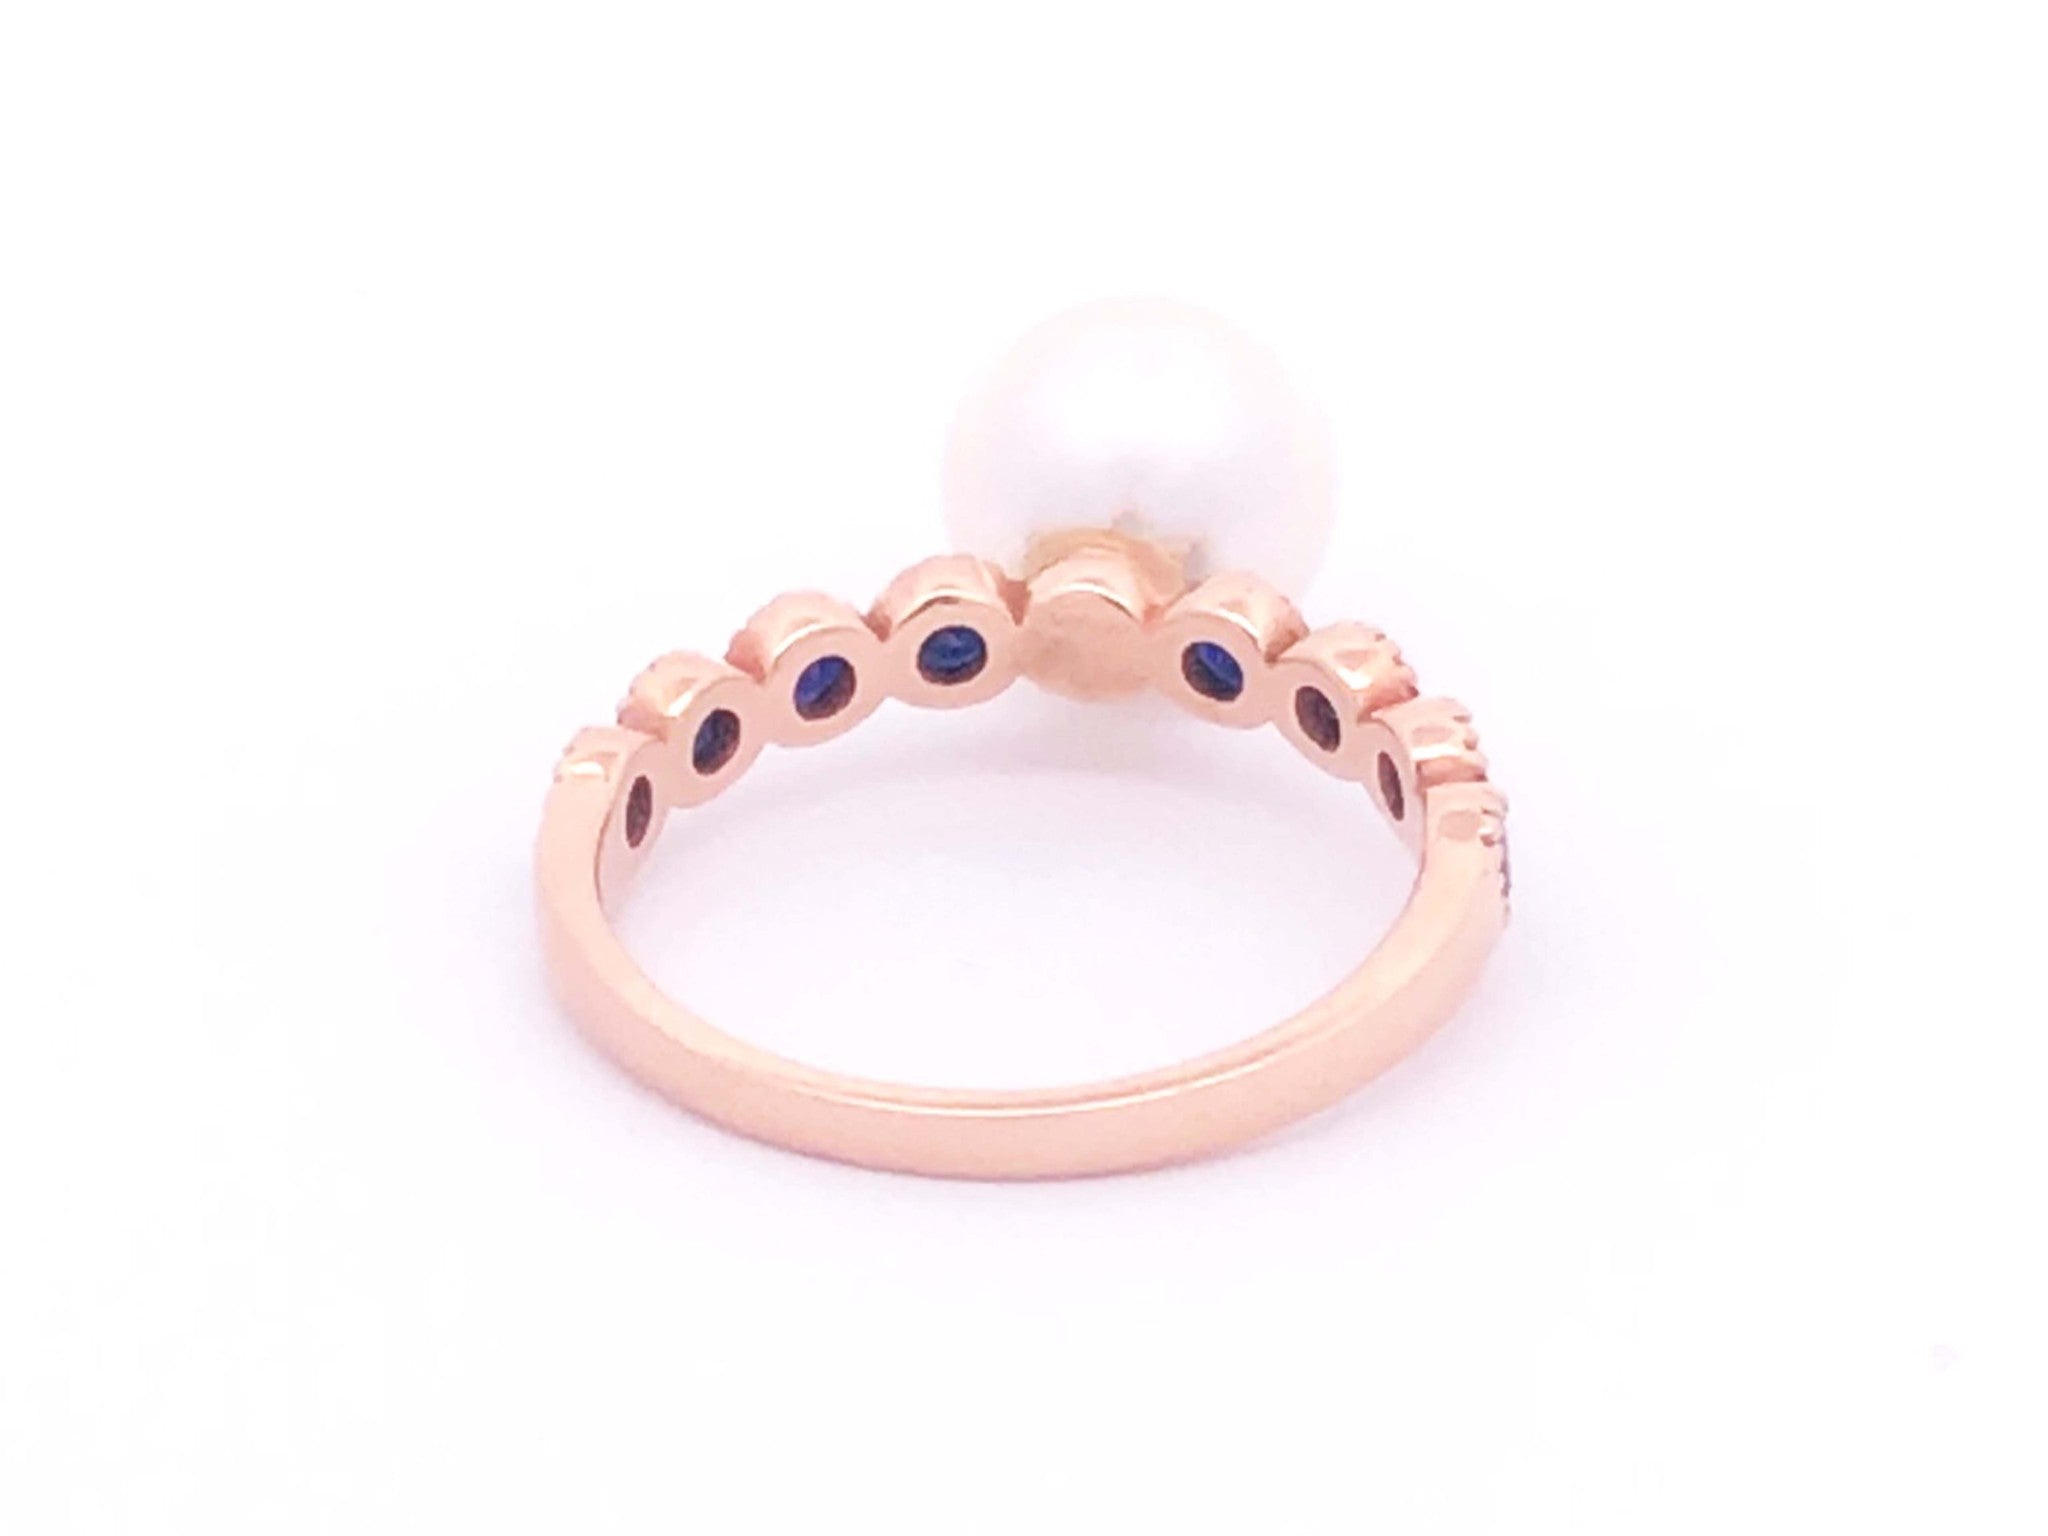 White Pearl Sapphire Ring in 14k Rose Gold